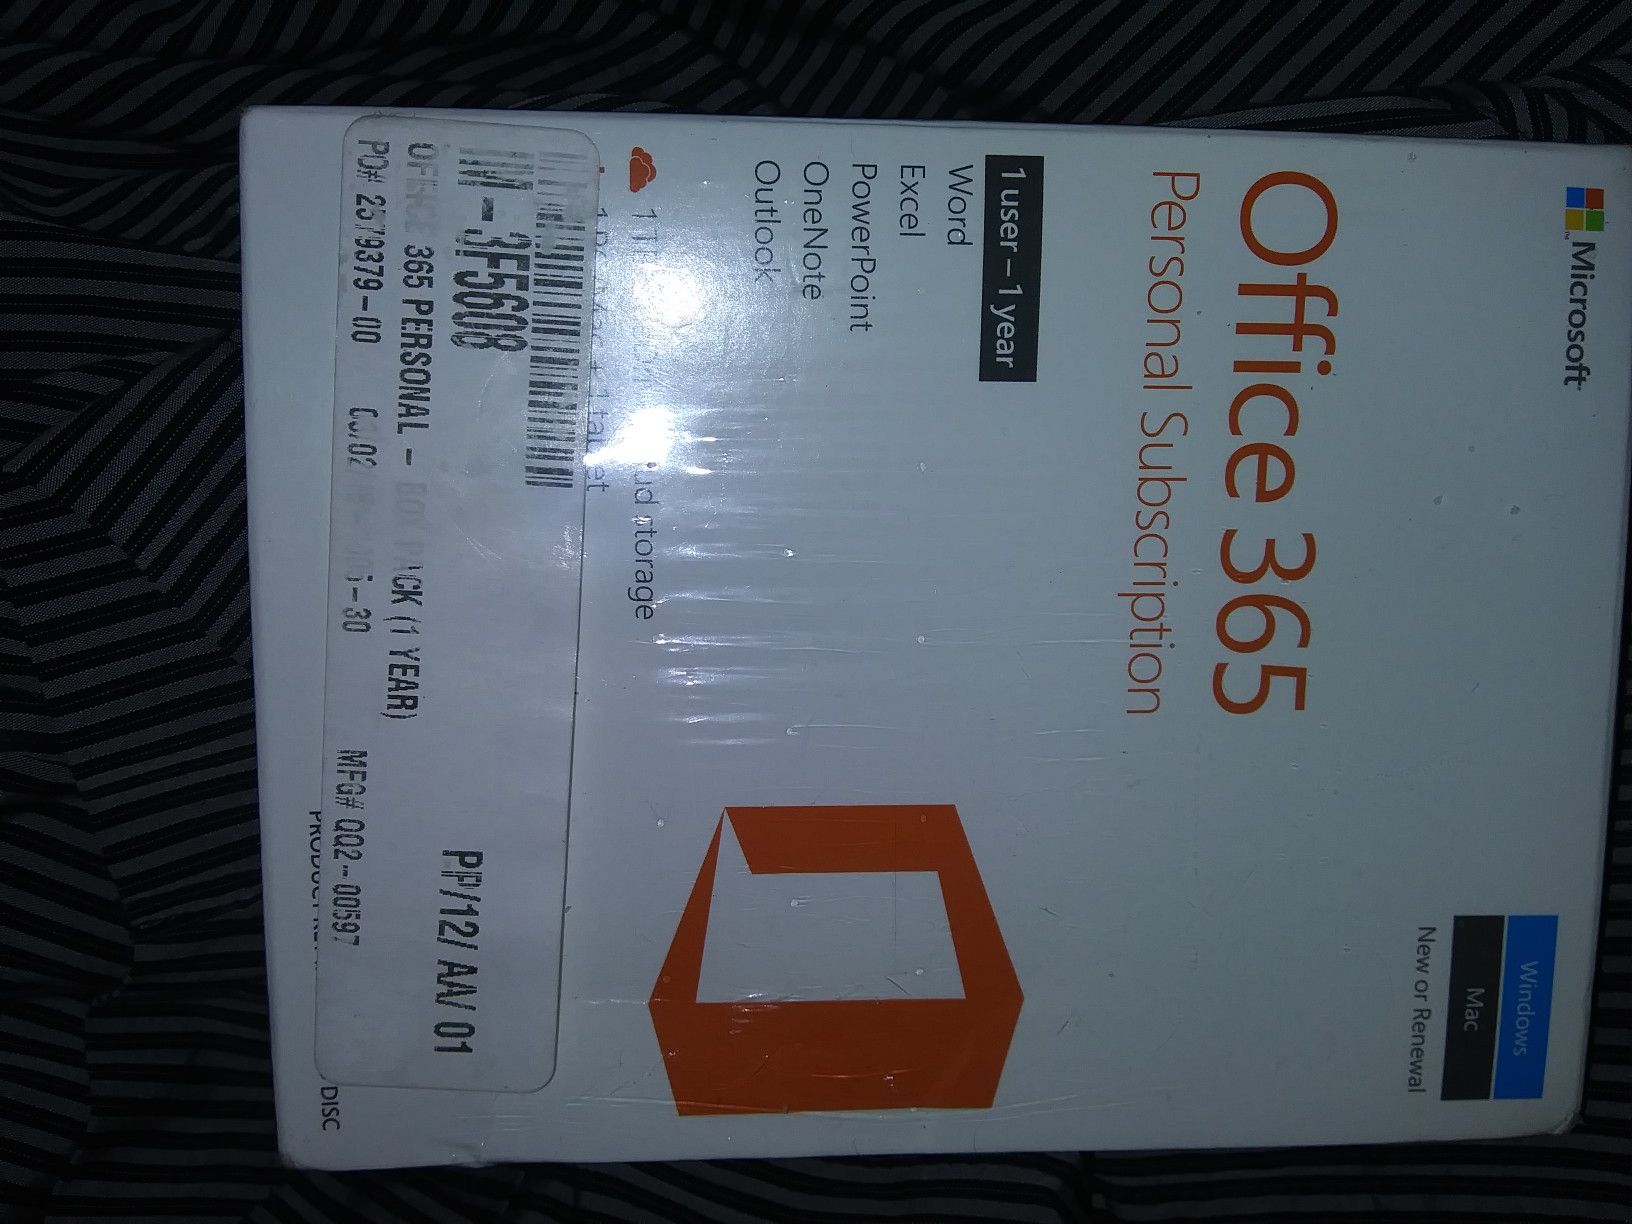 OFFICE 365 PERSONAL 1 YEAR $20